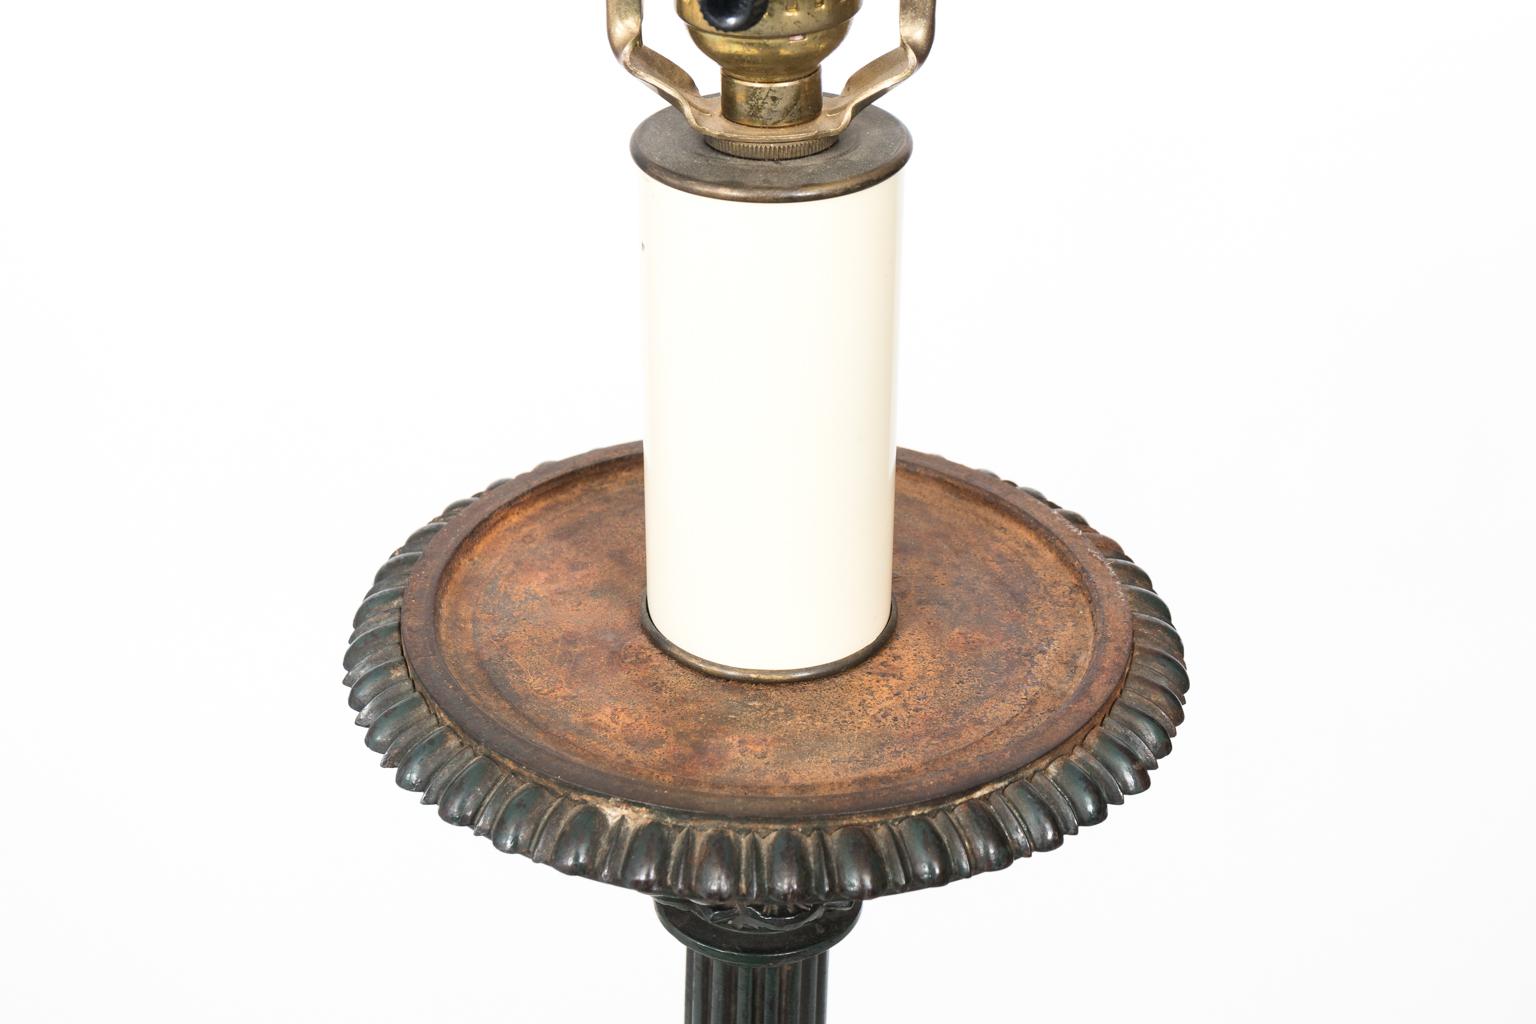 Floor lamp in the neoclassical style with lion's paw feet on a tripod base, circa late 19th century. Shade not included. Please note of wear consistent with age including oxidation at the top of the lamp along with a chip on the gadroon trim.